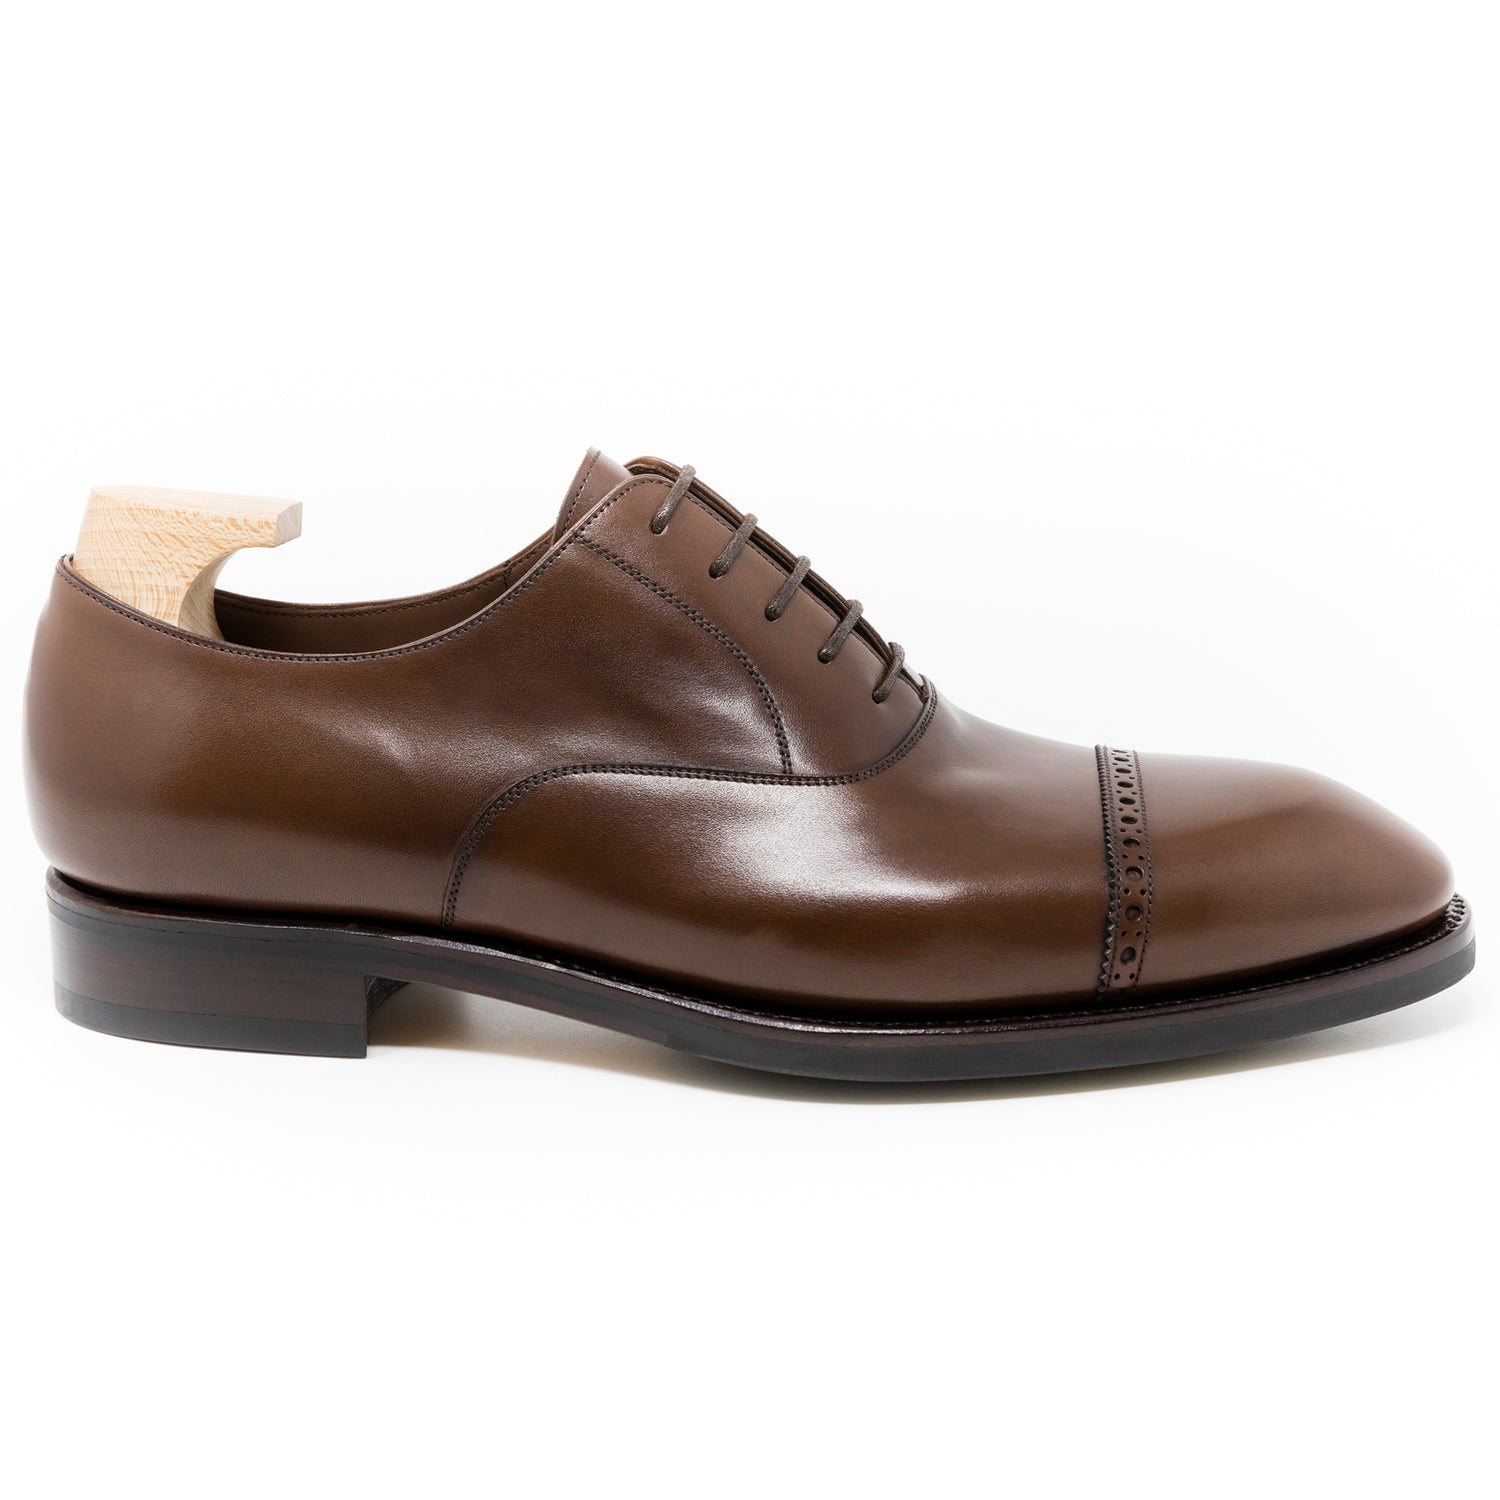 TLB Mallorca leather shoes 503 / ALAN / VEGANO BROWN